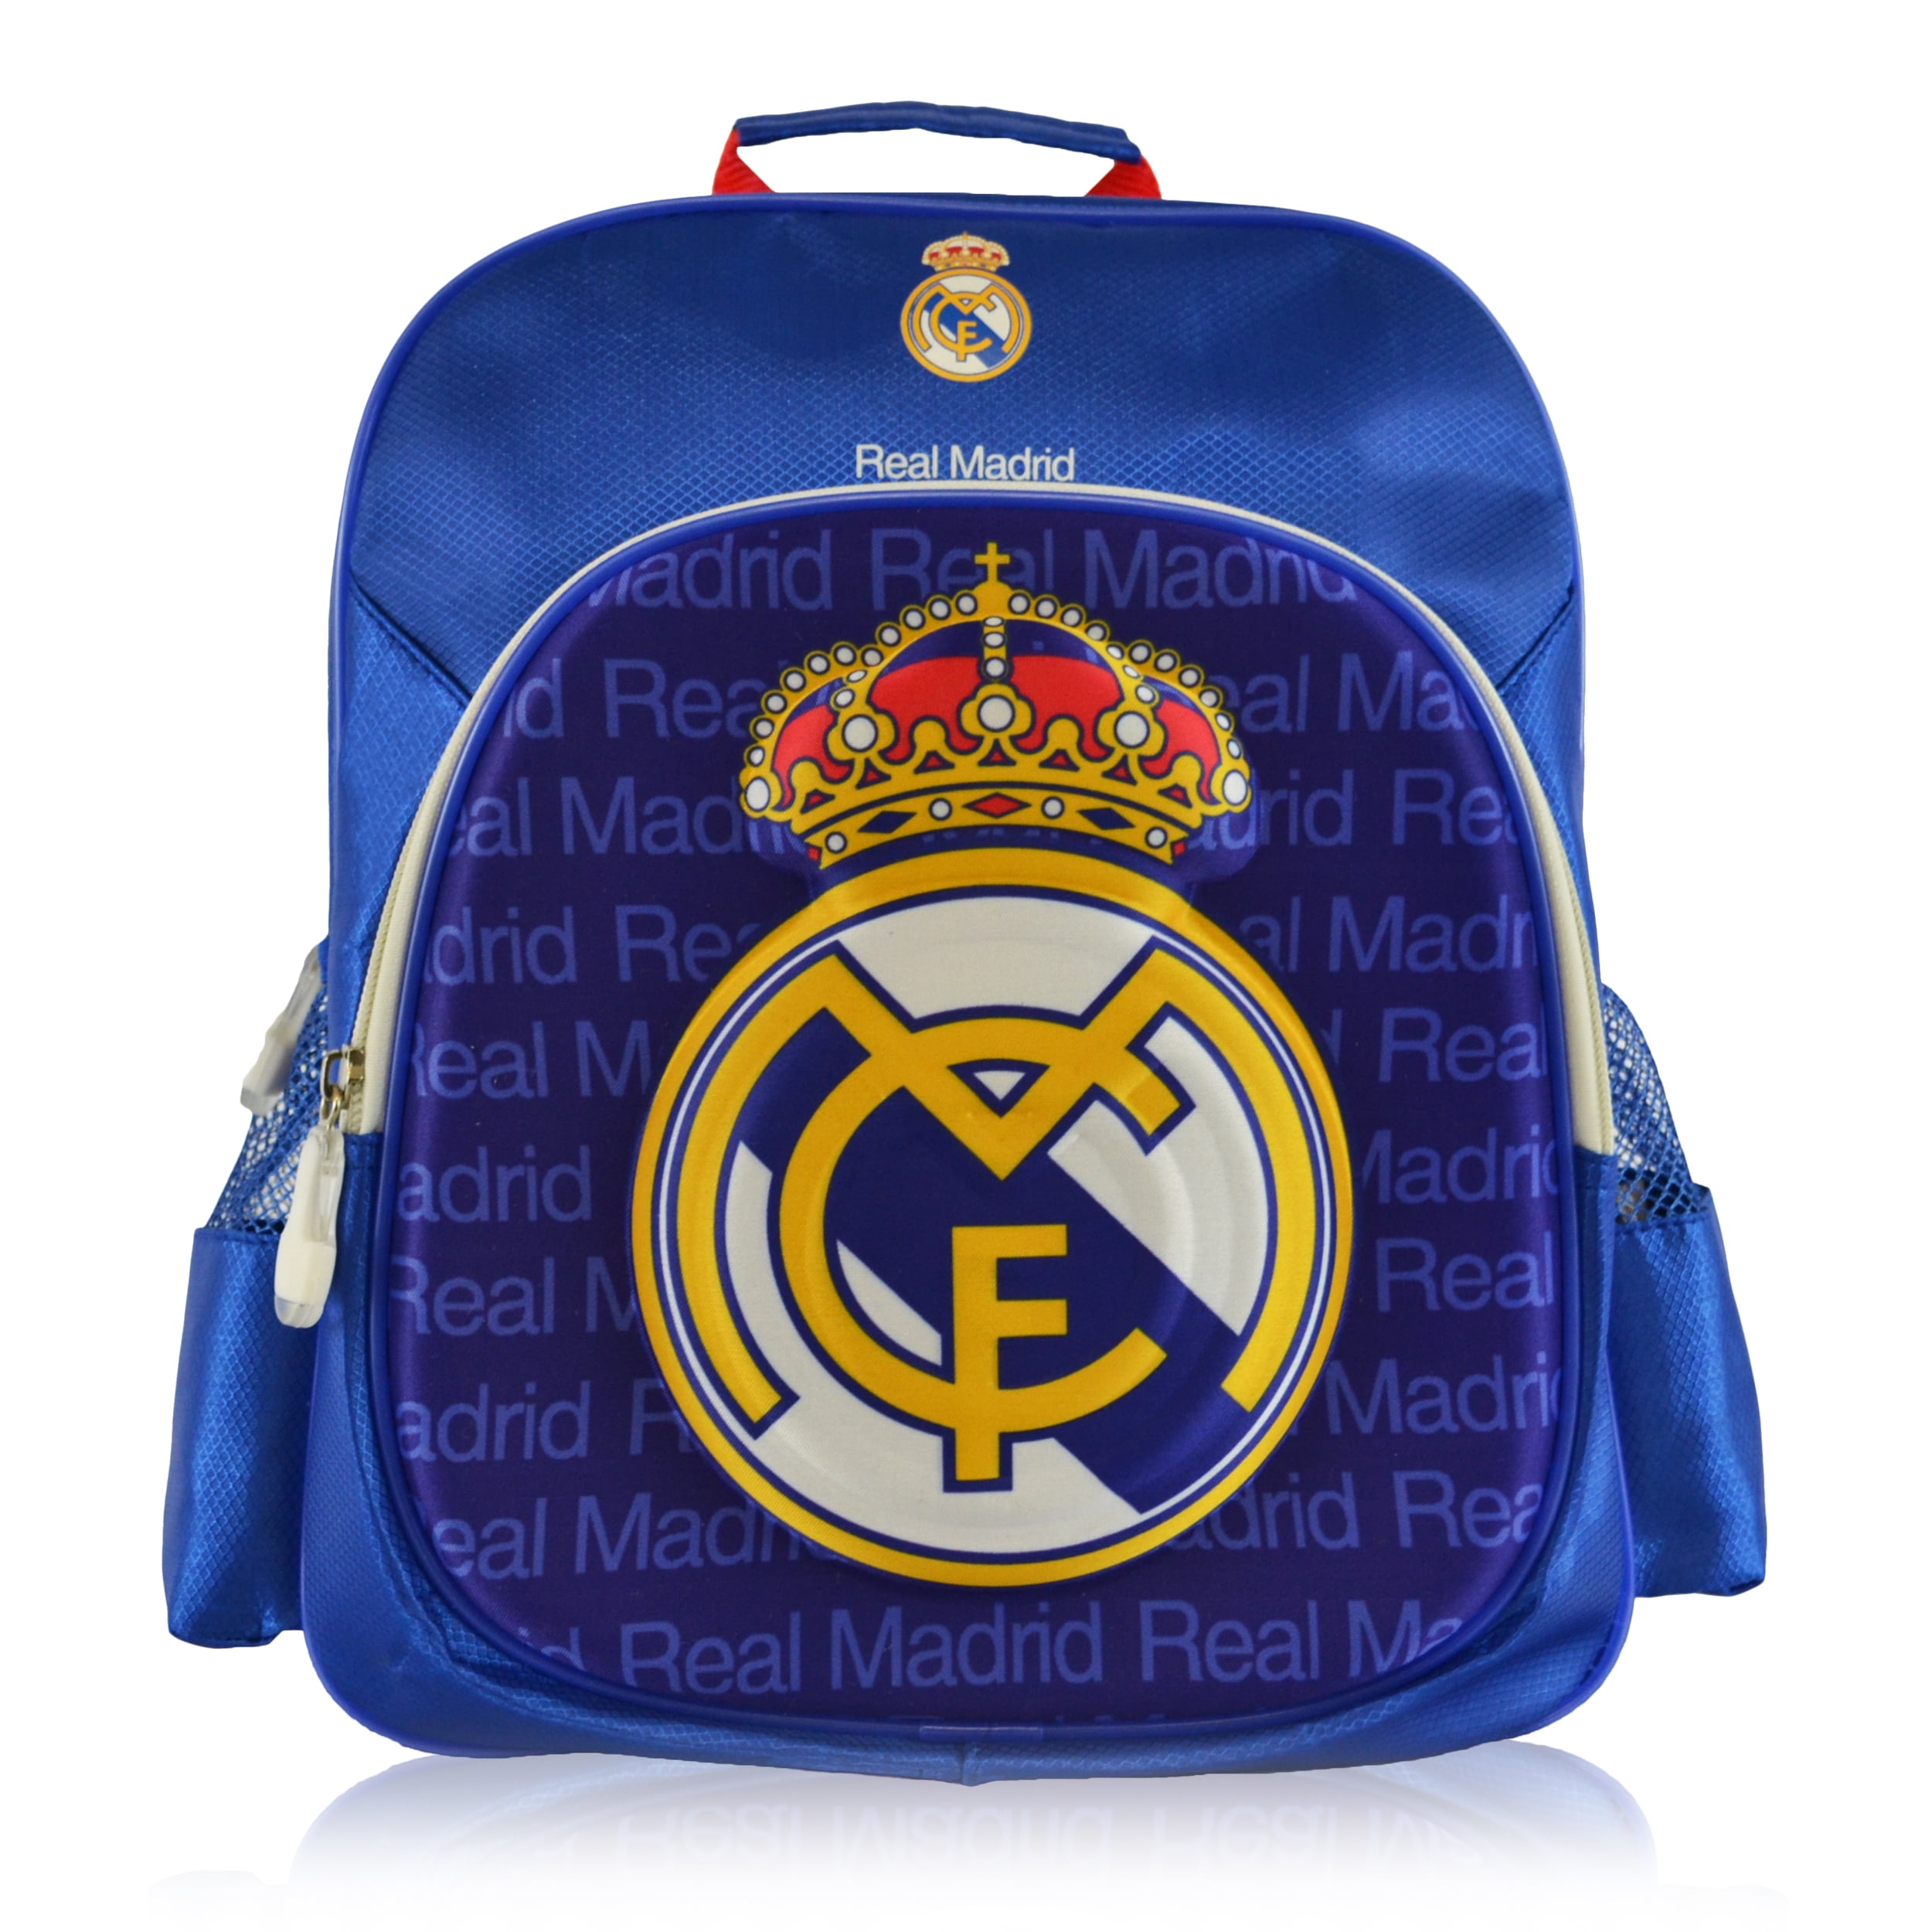 Backpack Fits Size 5 Ball In The Pocket Licensed Real M Real Madrid Backpack 